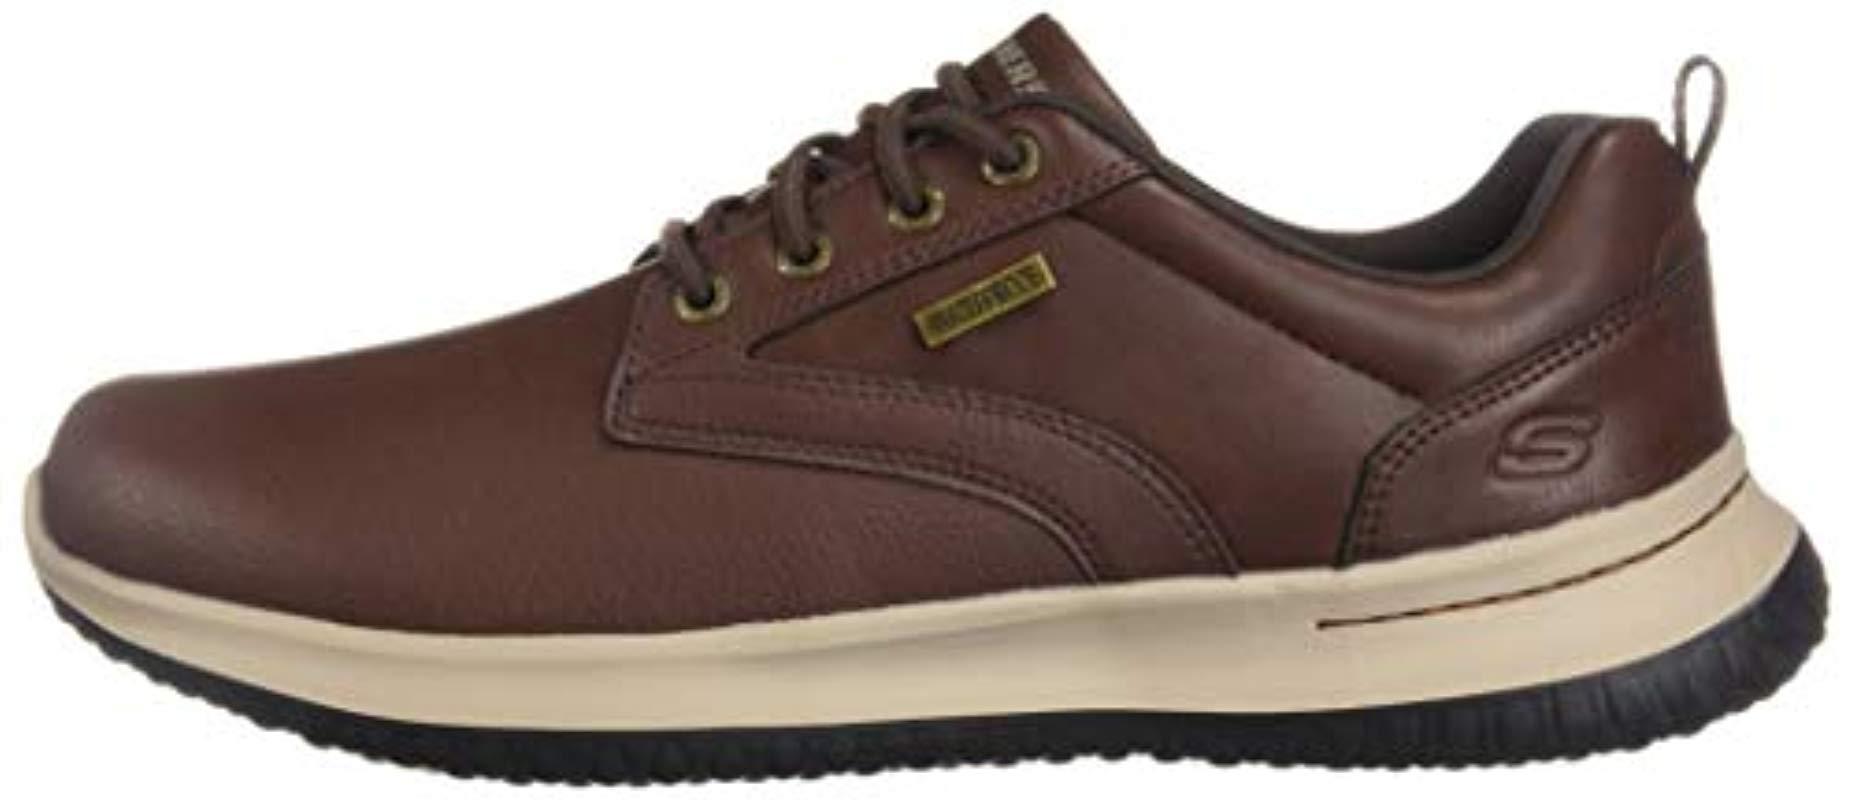 Skechers Leather Delson-antigo Trainers in Brown for Men - Lyst